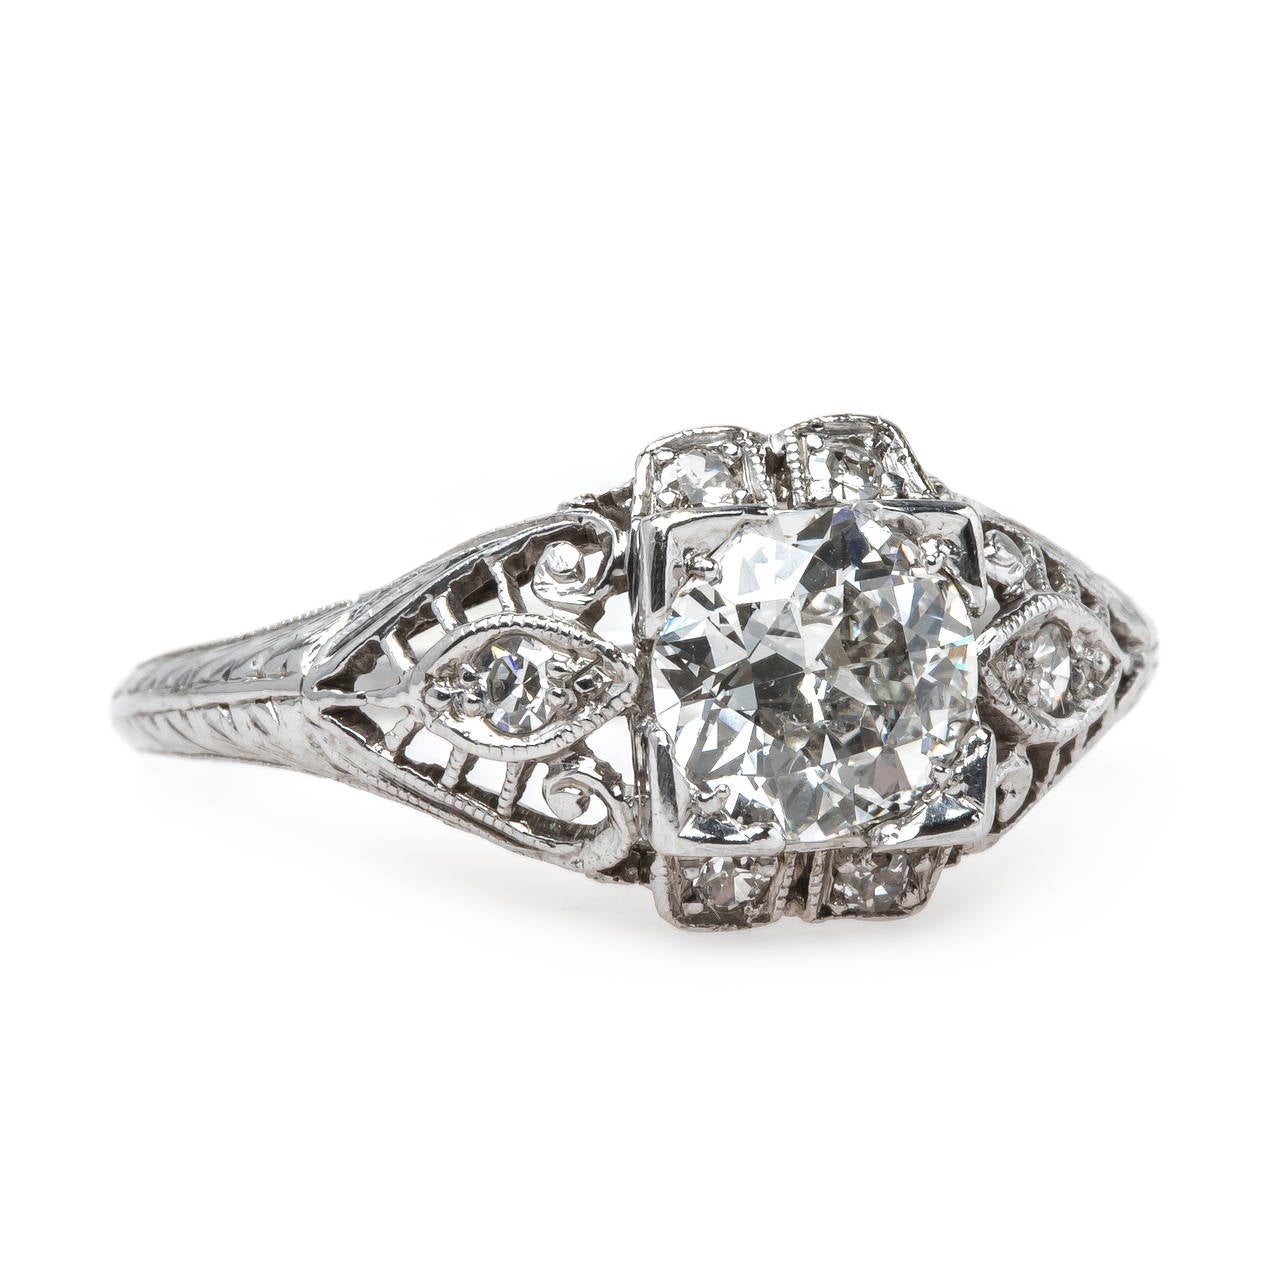 Captiva is truly a one-of-a-kind Edwardian era (circa 1915) platinum ring centering a box set 0.71ct EGL certified Old Mine Brilliant Cut diamond graded G color and SI1 clarity. This alluring ring is a statement of perfection and is further adorned